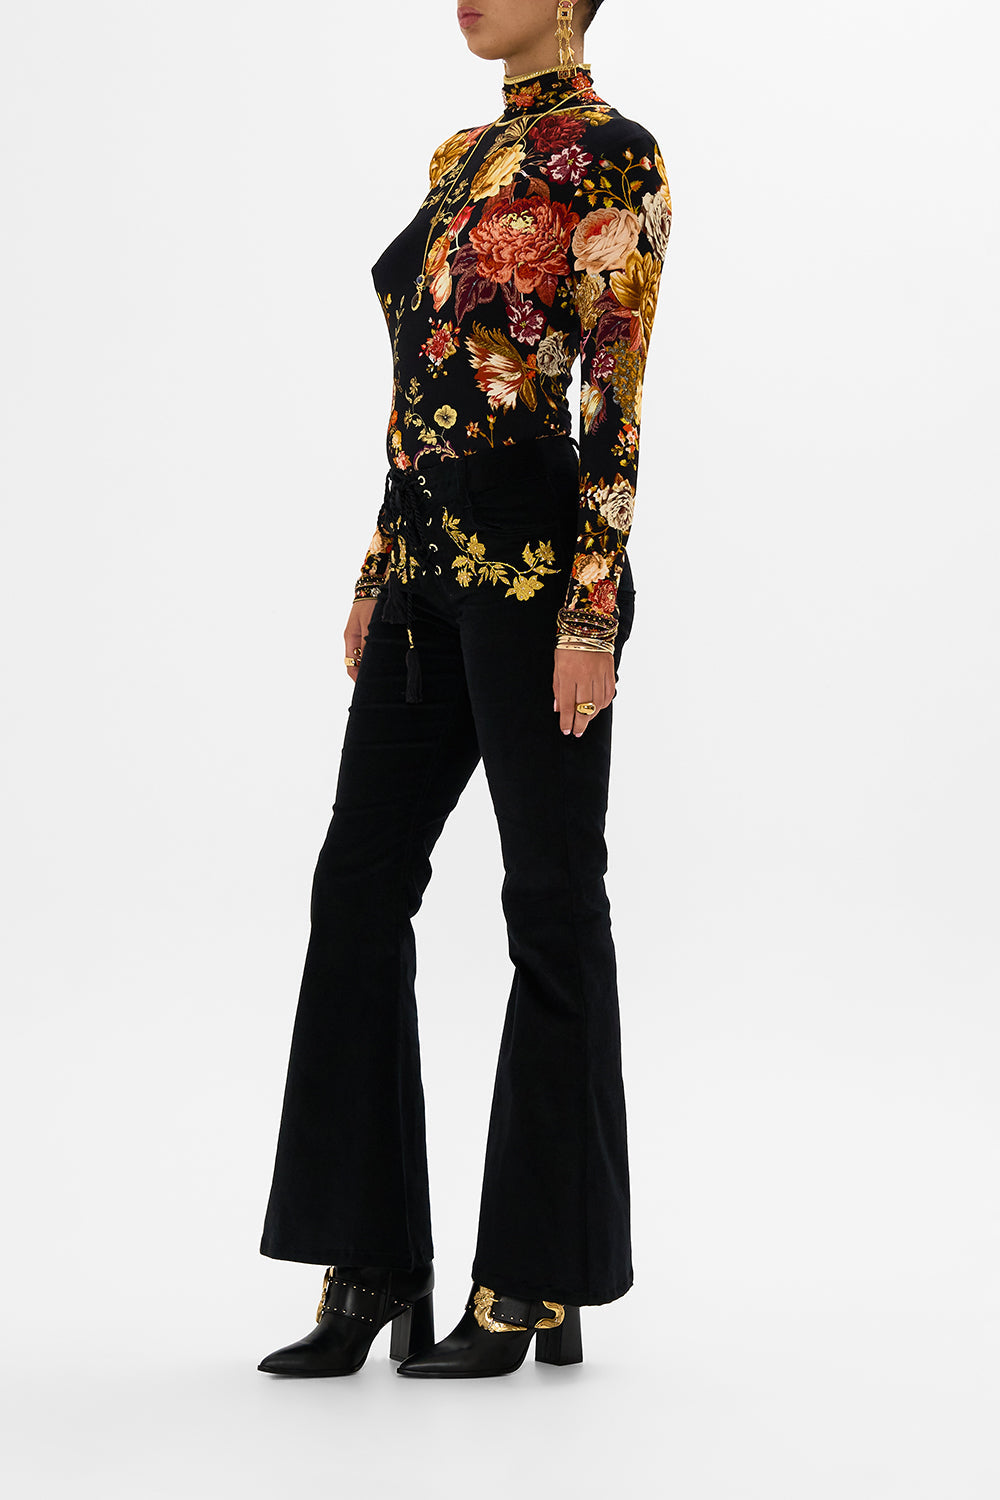 CAMILLA floral jersey turtleneck in Stitched In Time print.